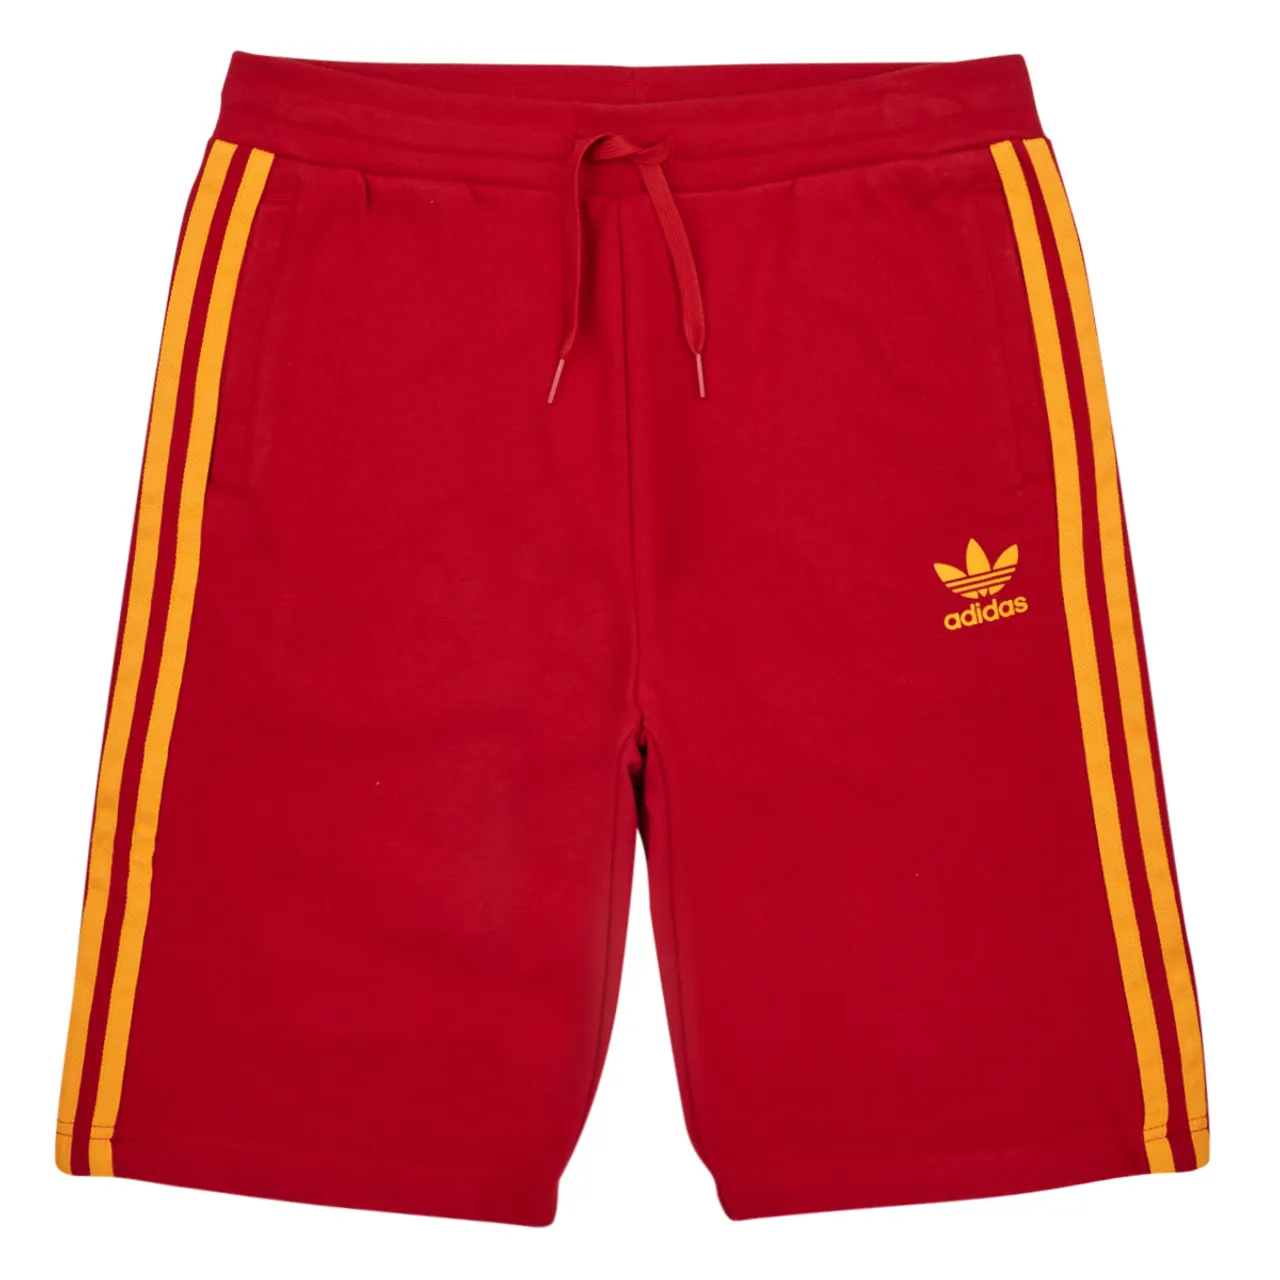 adidas  SHORTS COUPE DU MONDE Espagne  boys's Children's shorts in Red